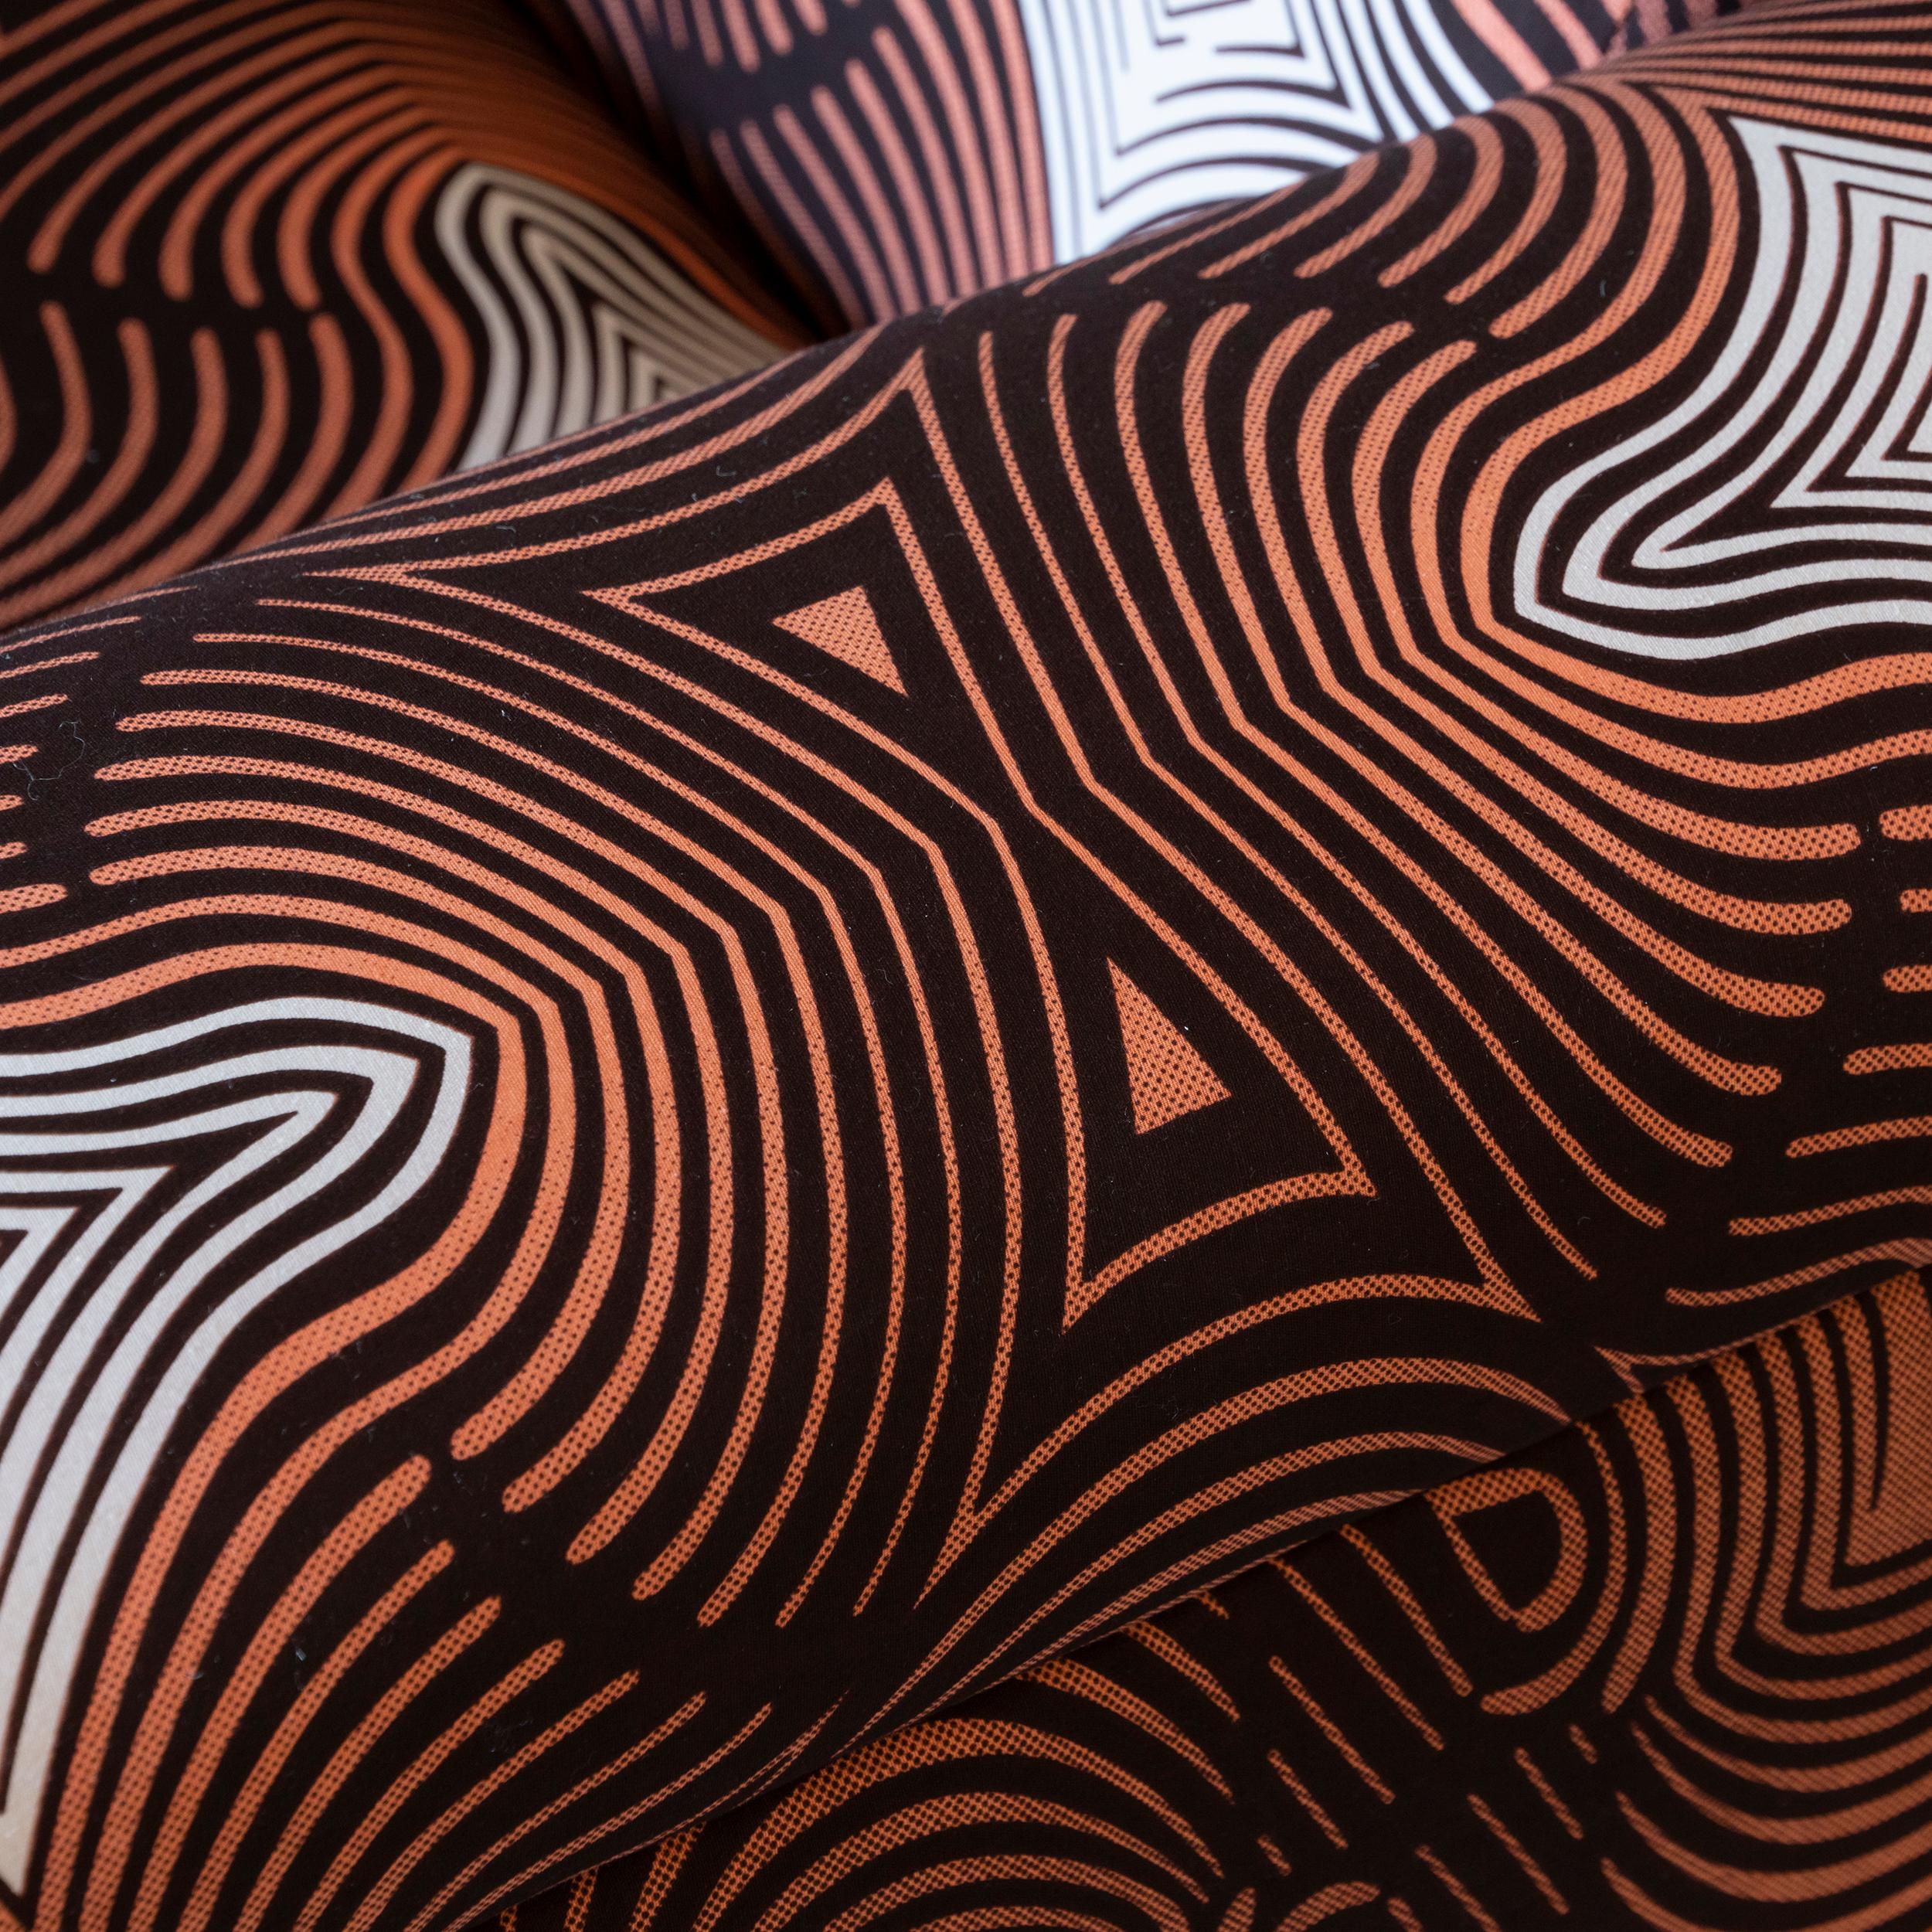 Pair of Tecno Armchairs Upholstered in Orange/Black Jacquard Fabric, Italy, 1966 For Sale 5